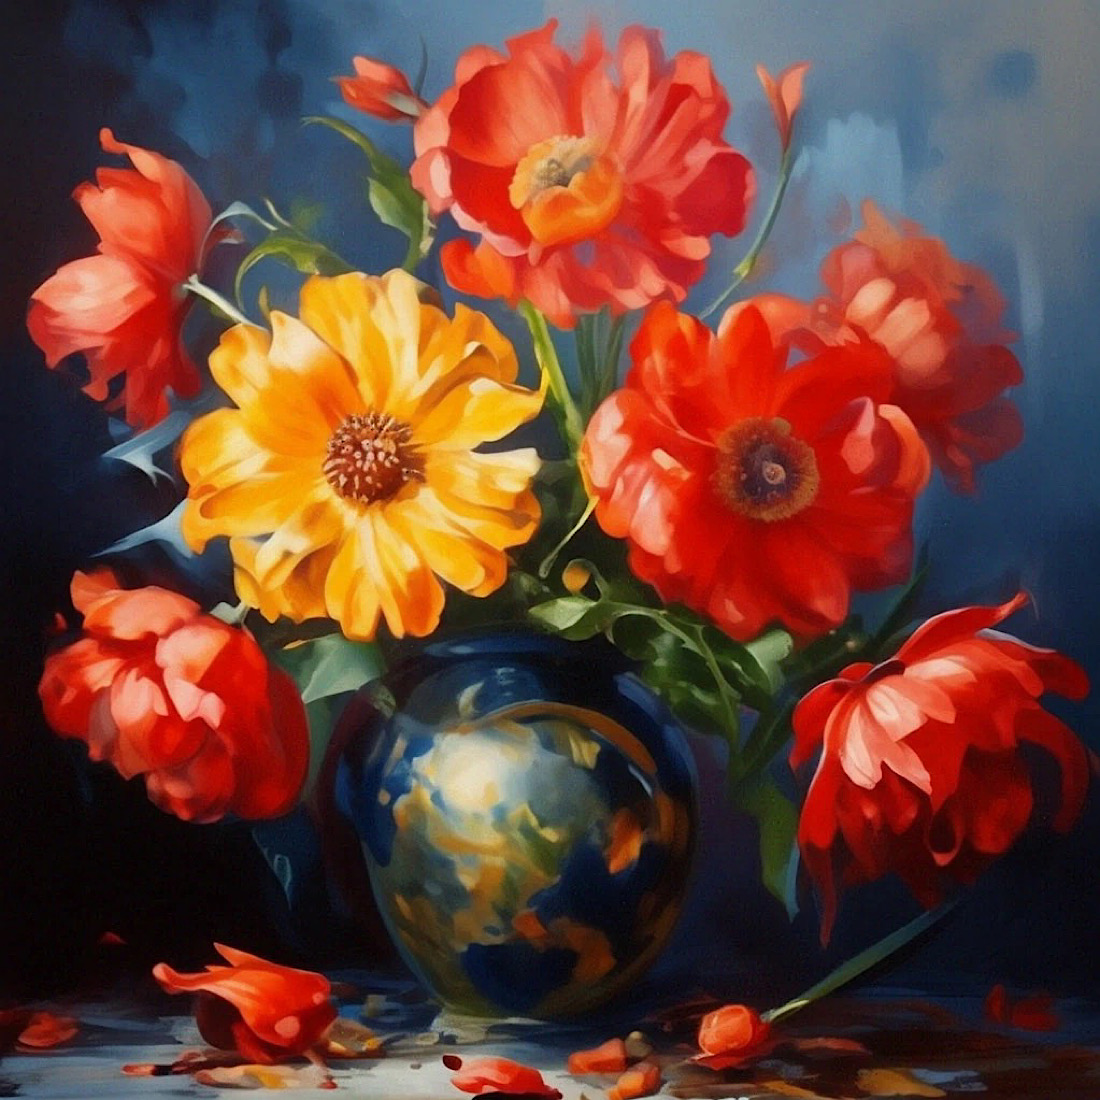 Still life oil painting "Spring bouquet of flowers" preview image.